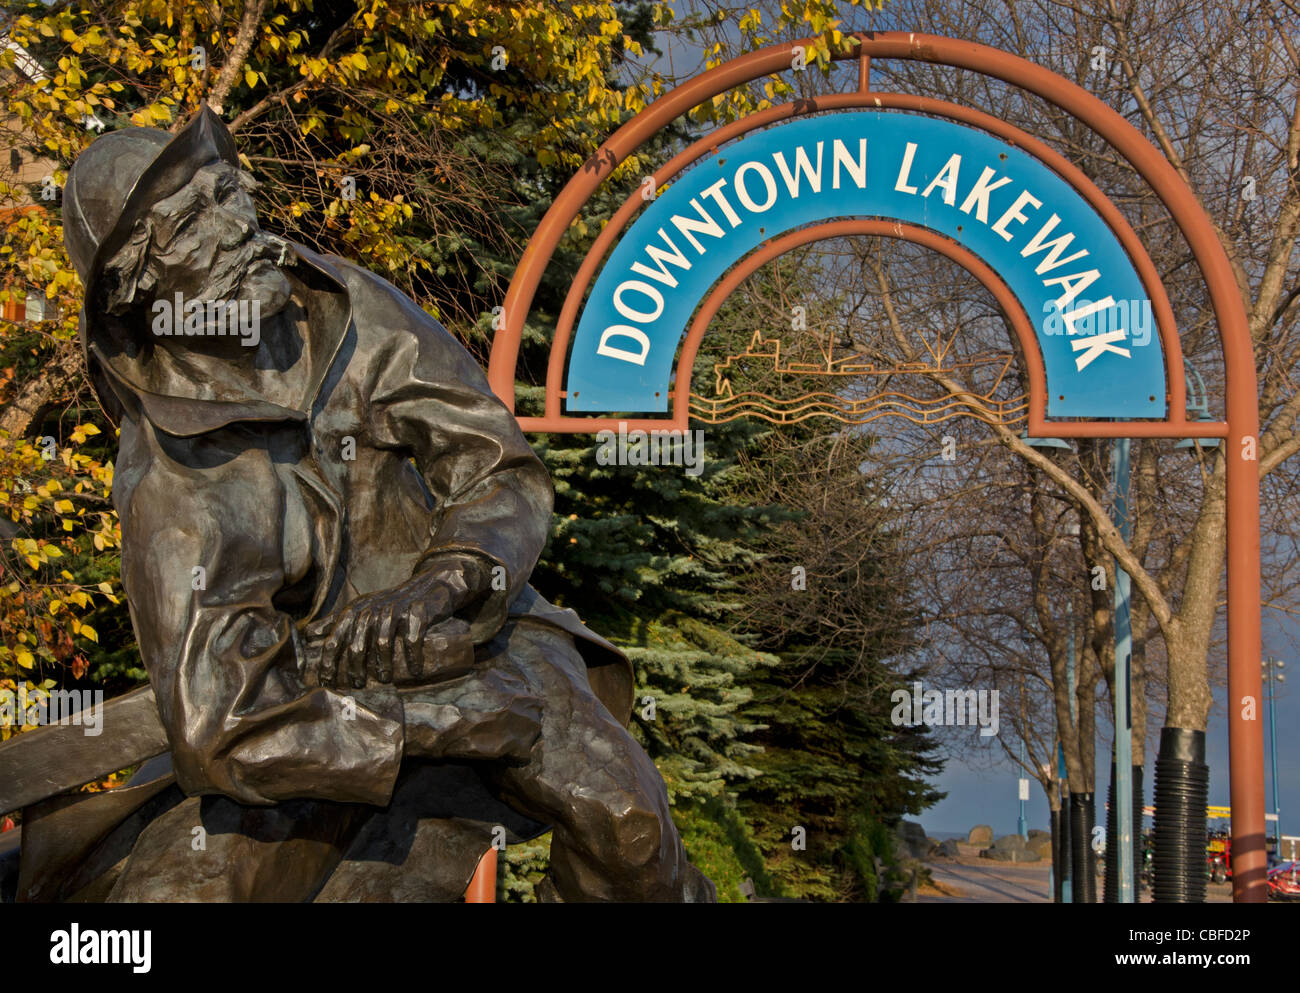 Old Sailor Statue at the Downtown Lakewalk  along Lake Superior in Duluth, Minnesota Stock Photo